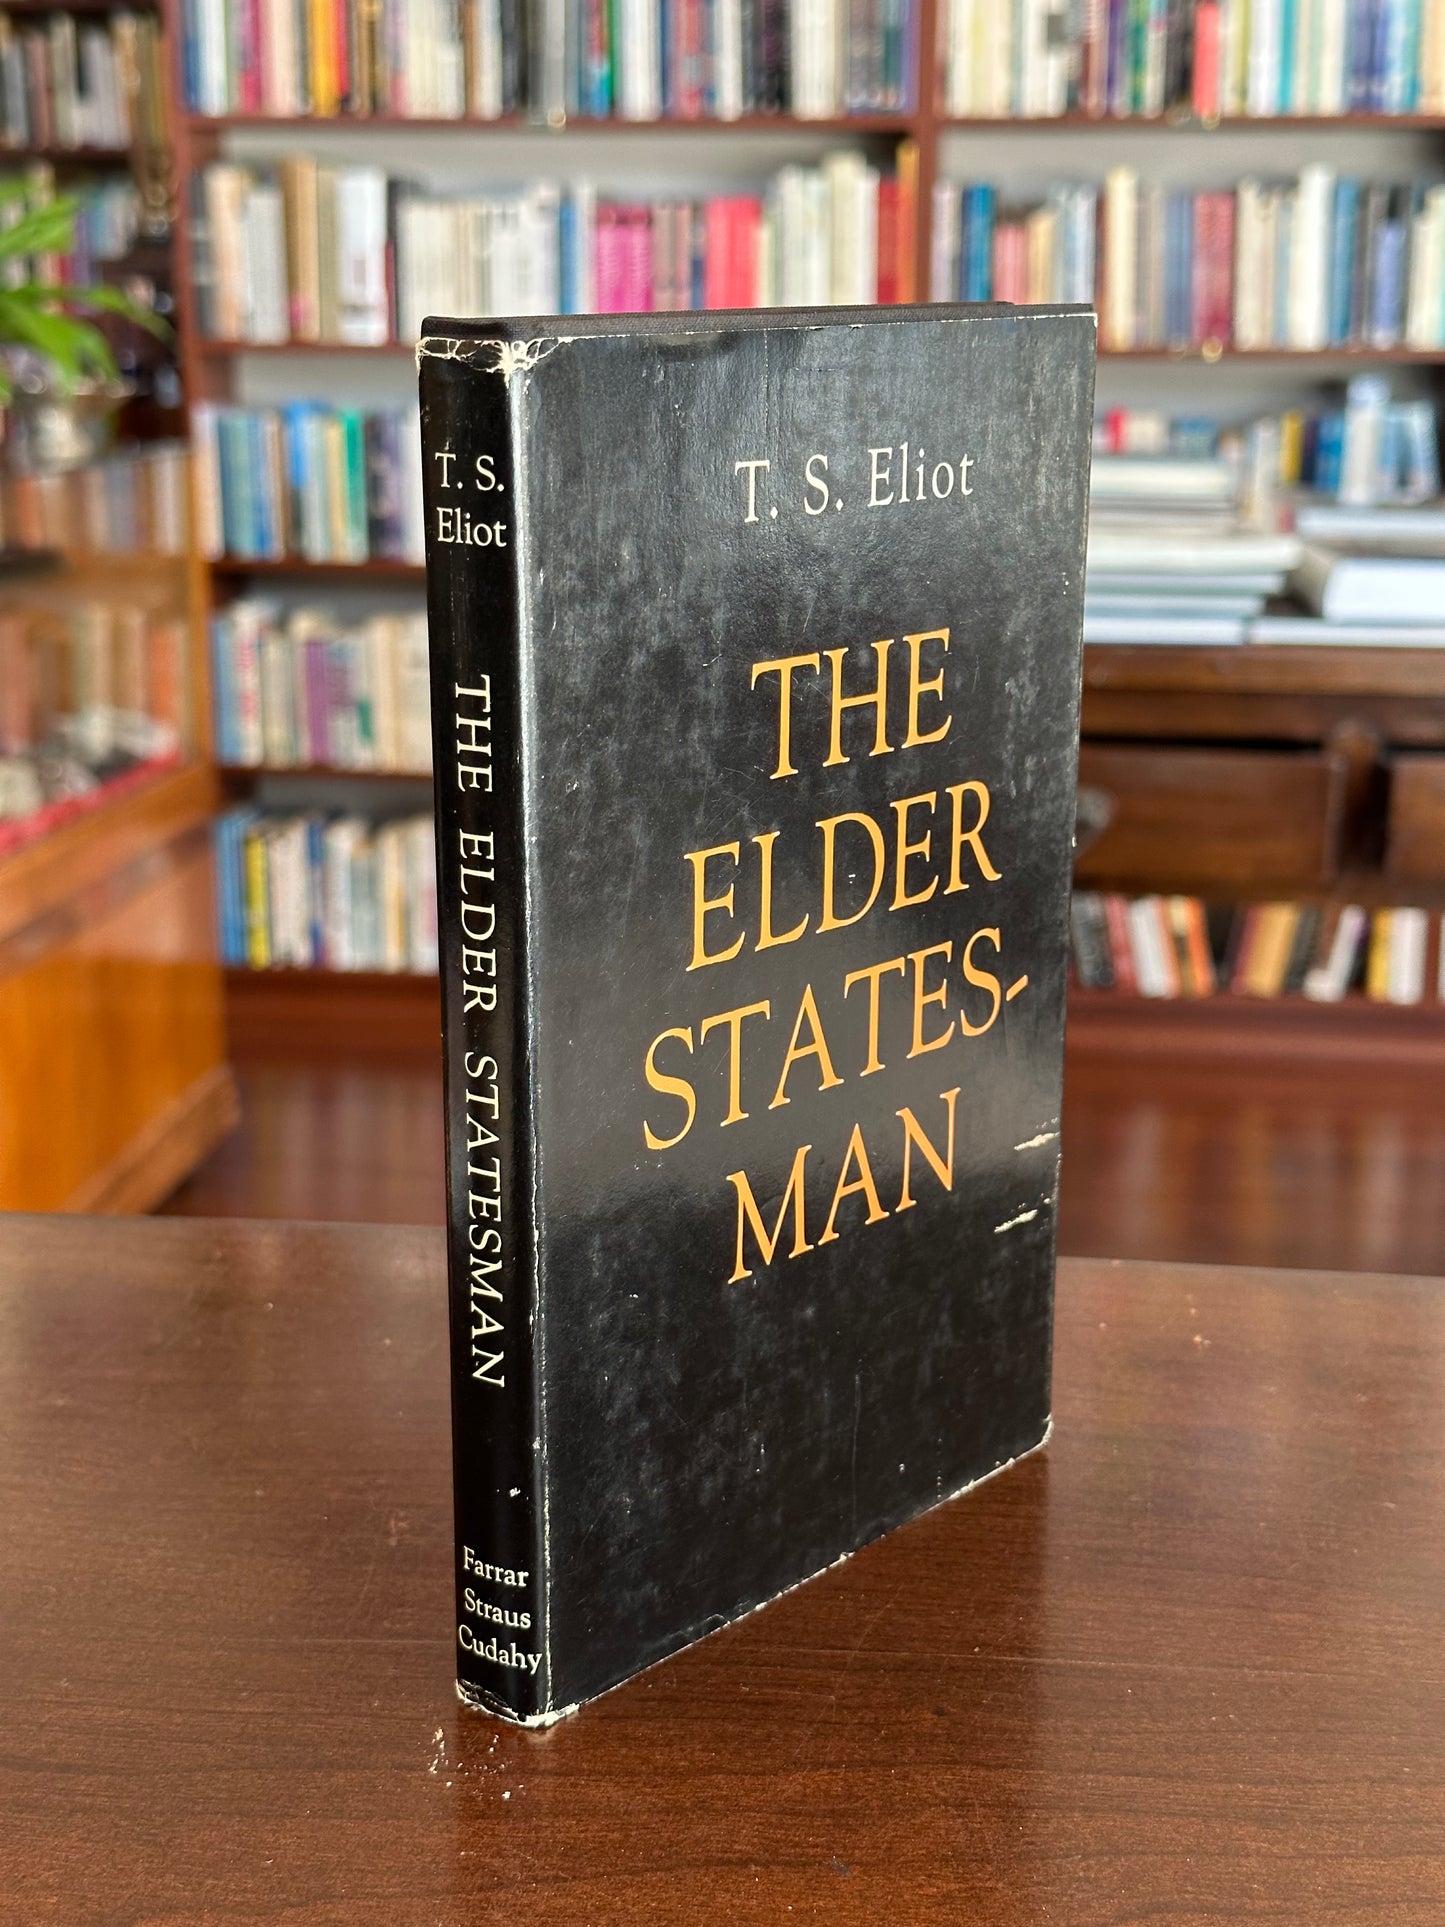 The Elder Statesman by T.S. Eliot (First Edition)